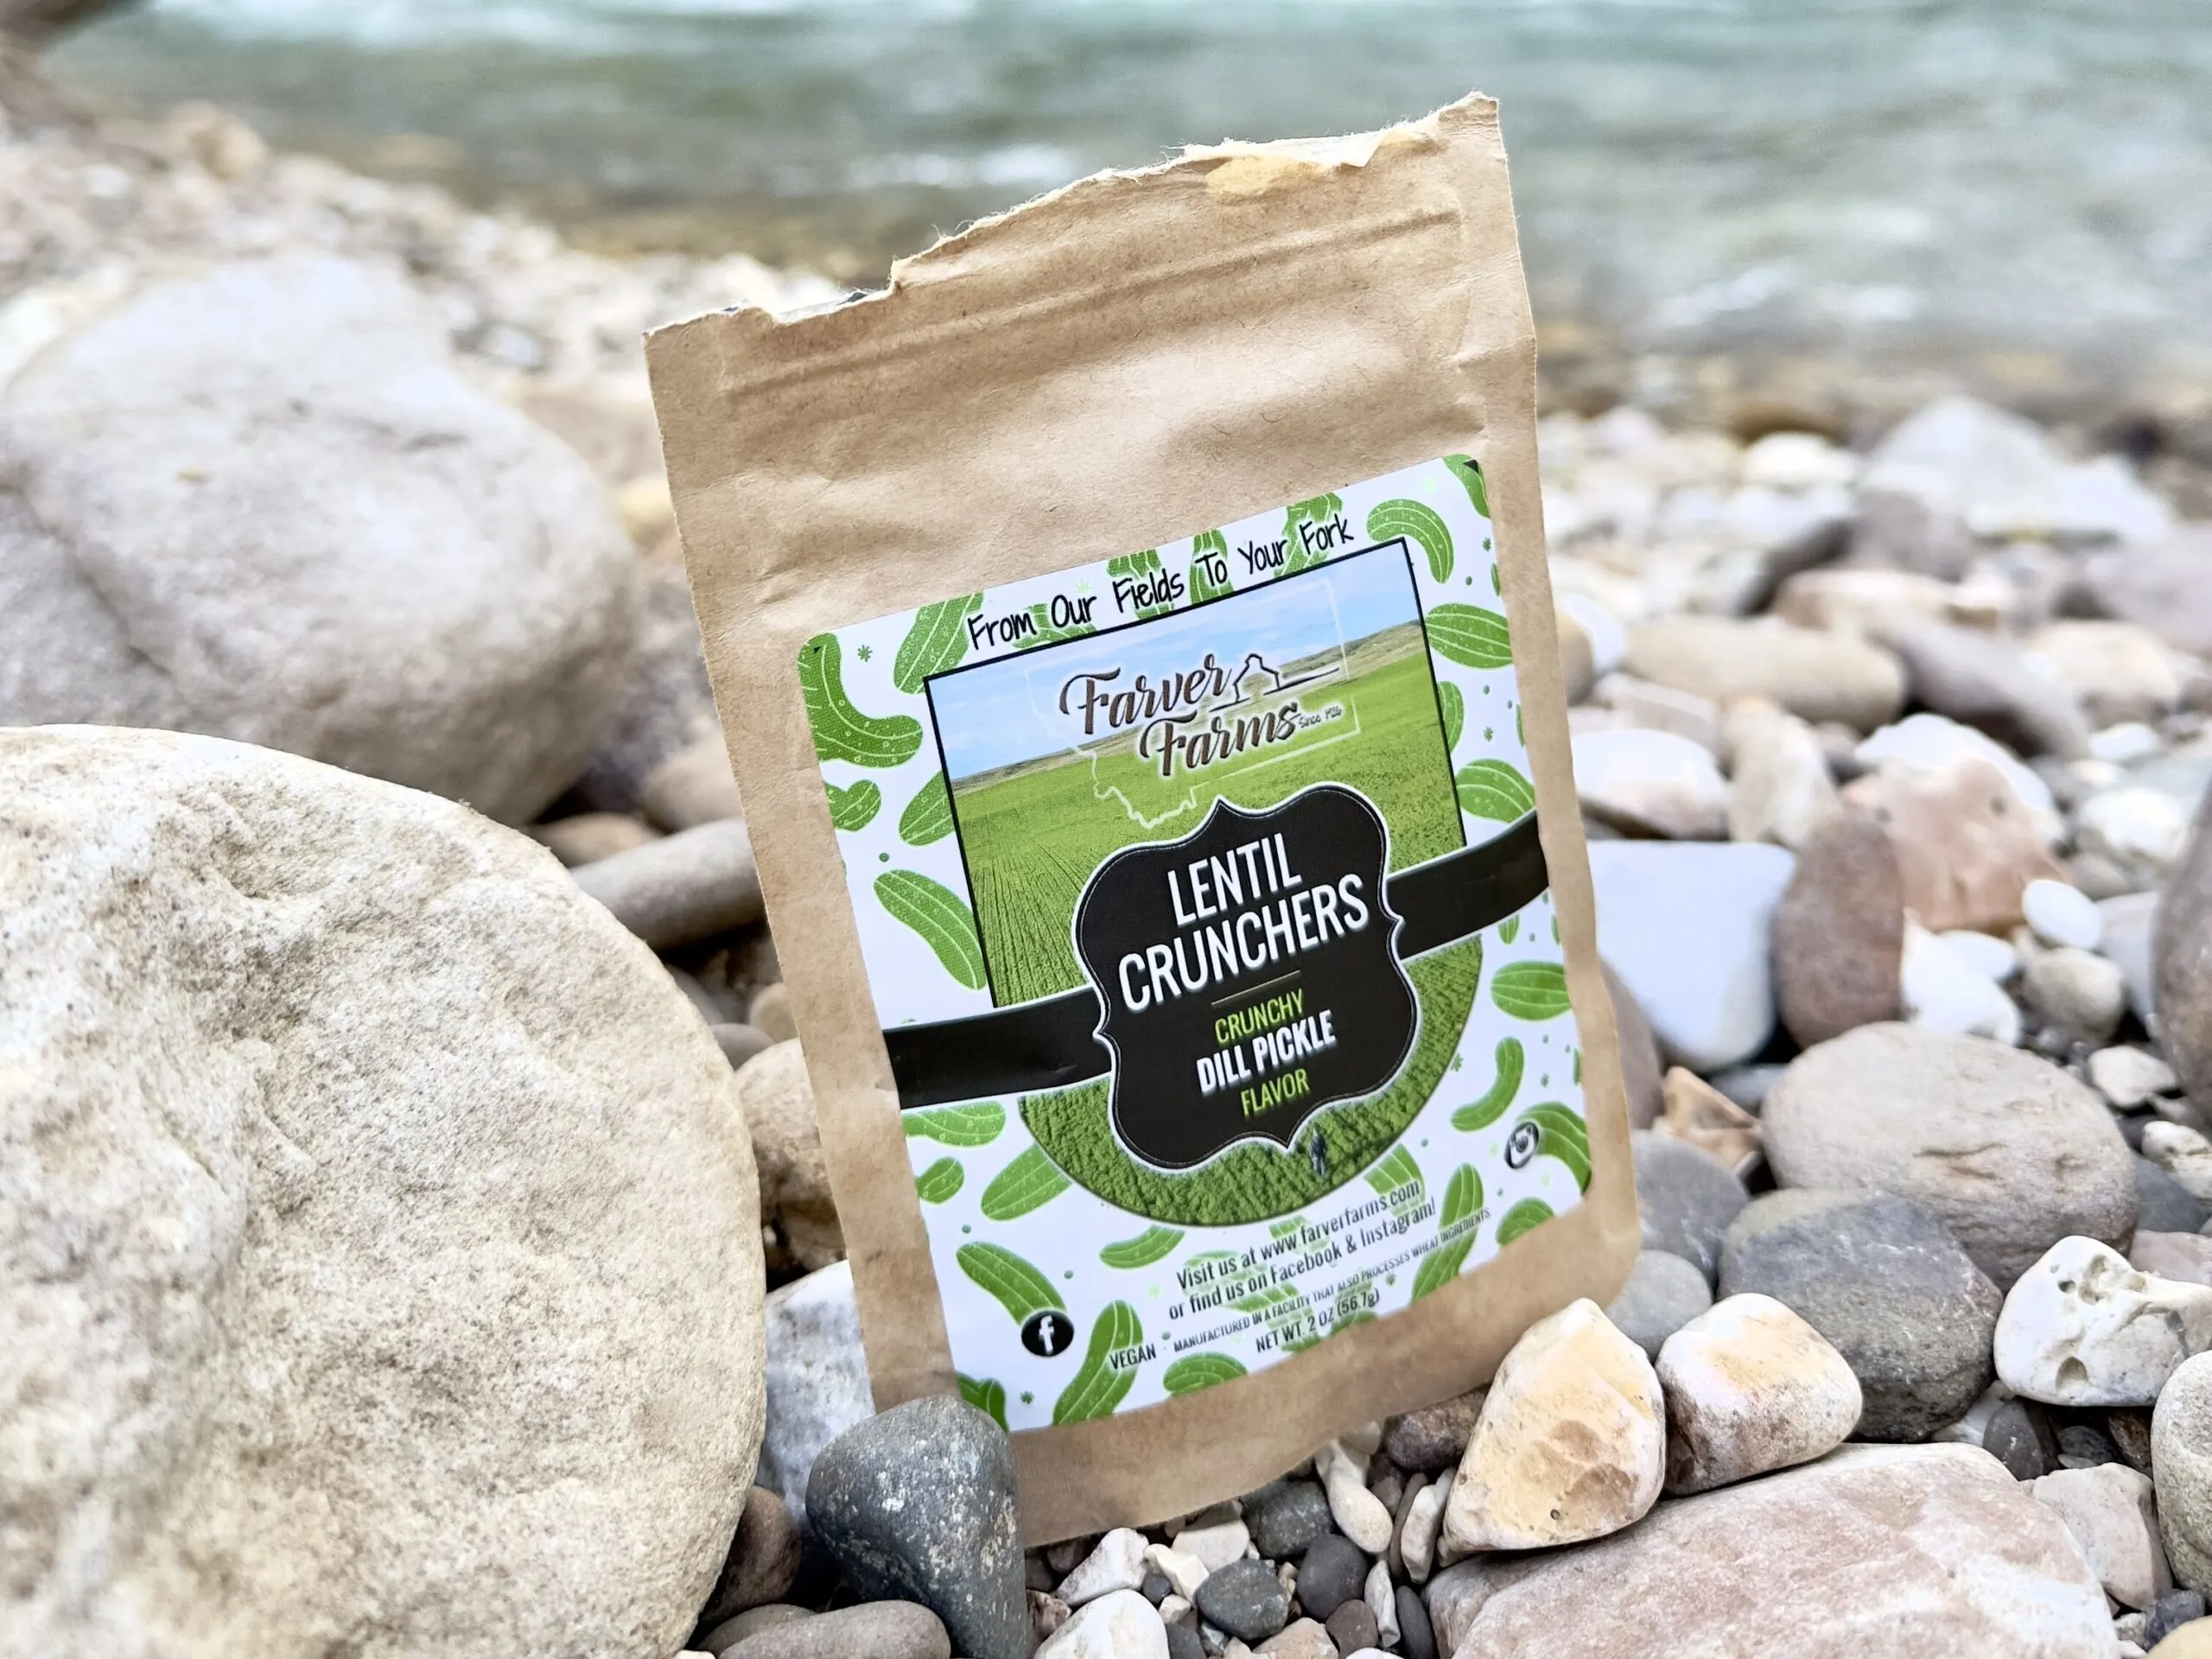 a 2 oz. sample pack of Farver Farms Lentil Crunchers in dill pickle flavor sitting on rocks by a river.